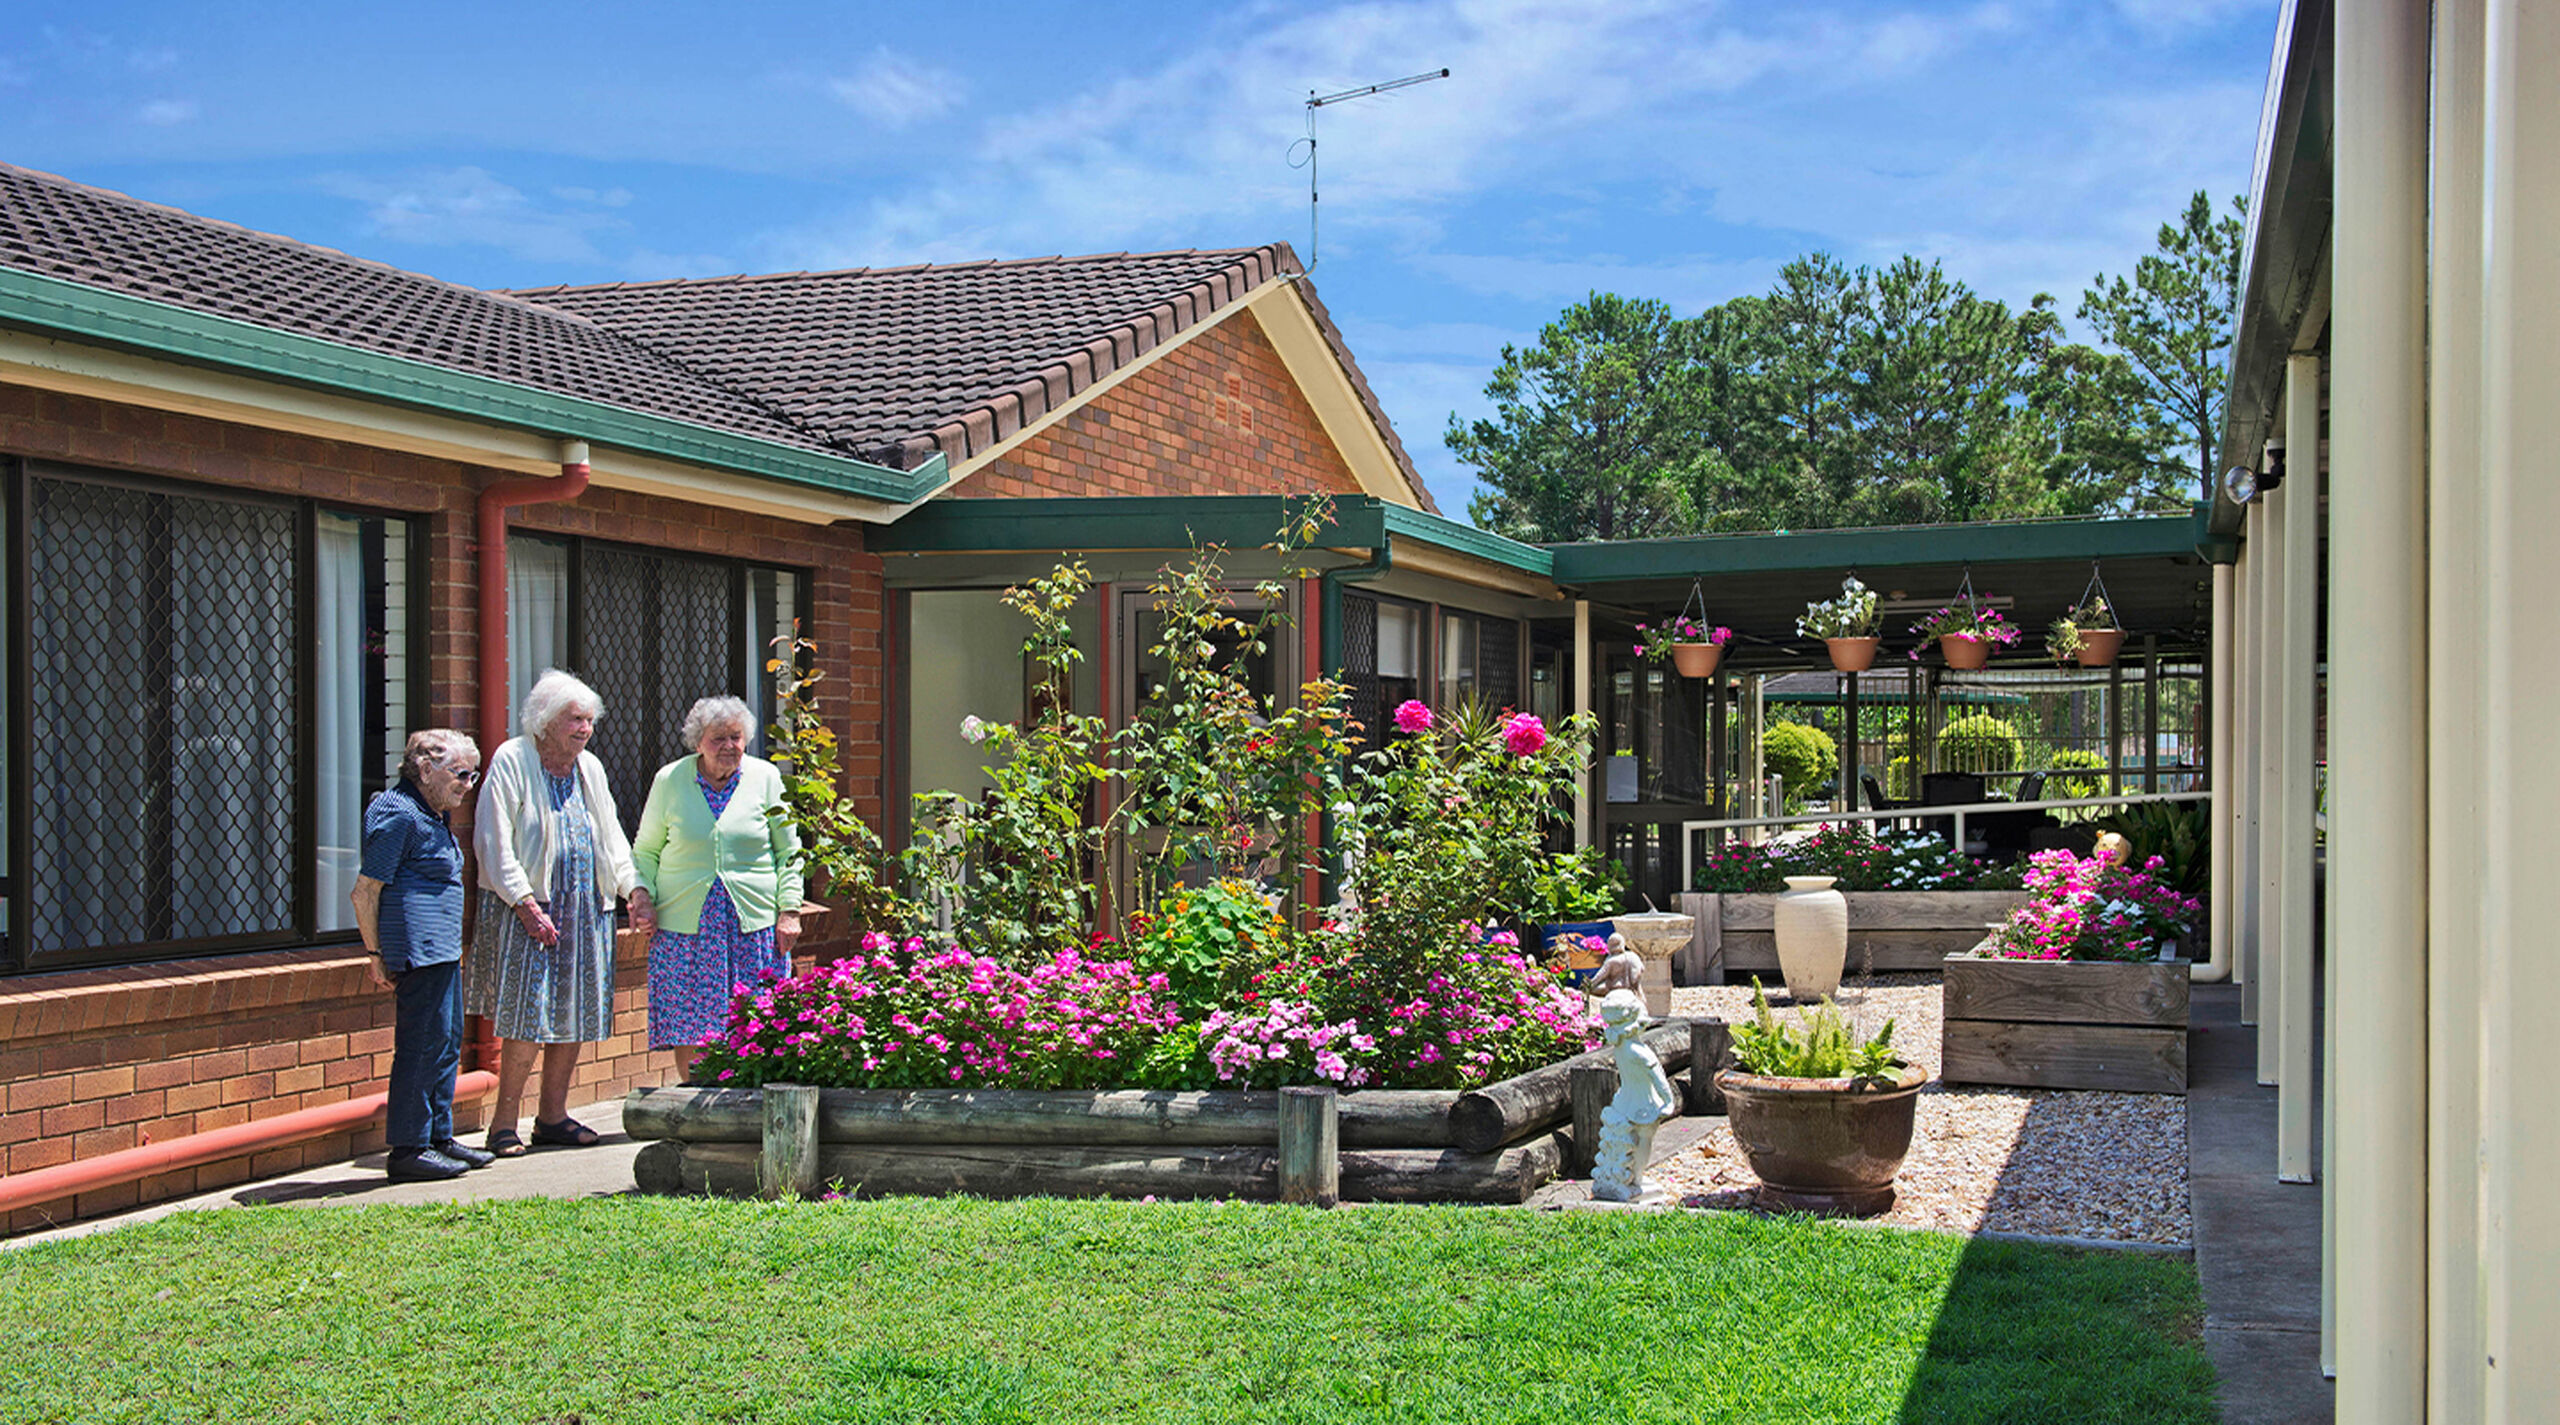 aged care home residents enjoying time in the gardens at baptistcare mid richmond centre residential aged care home in coraki nsw far north coast